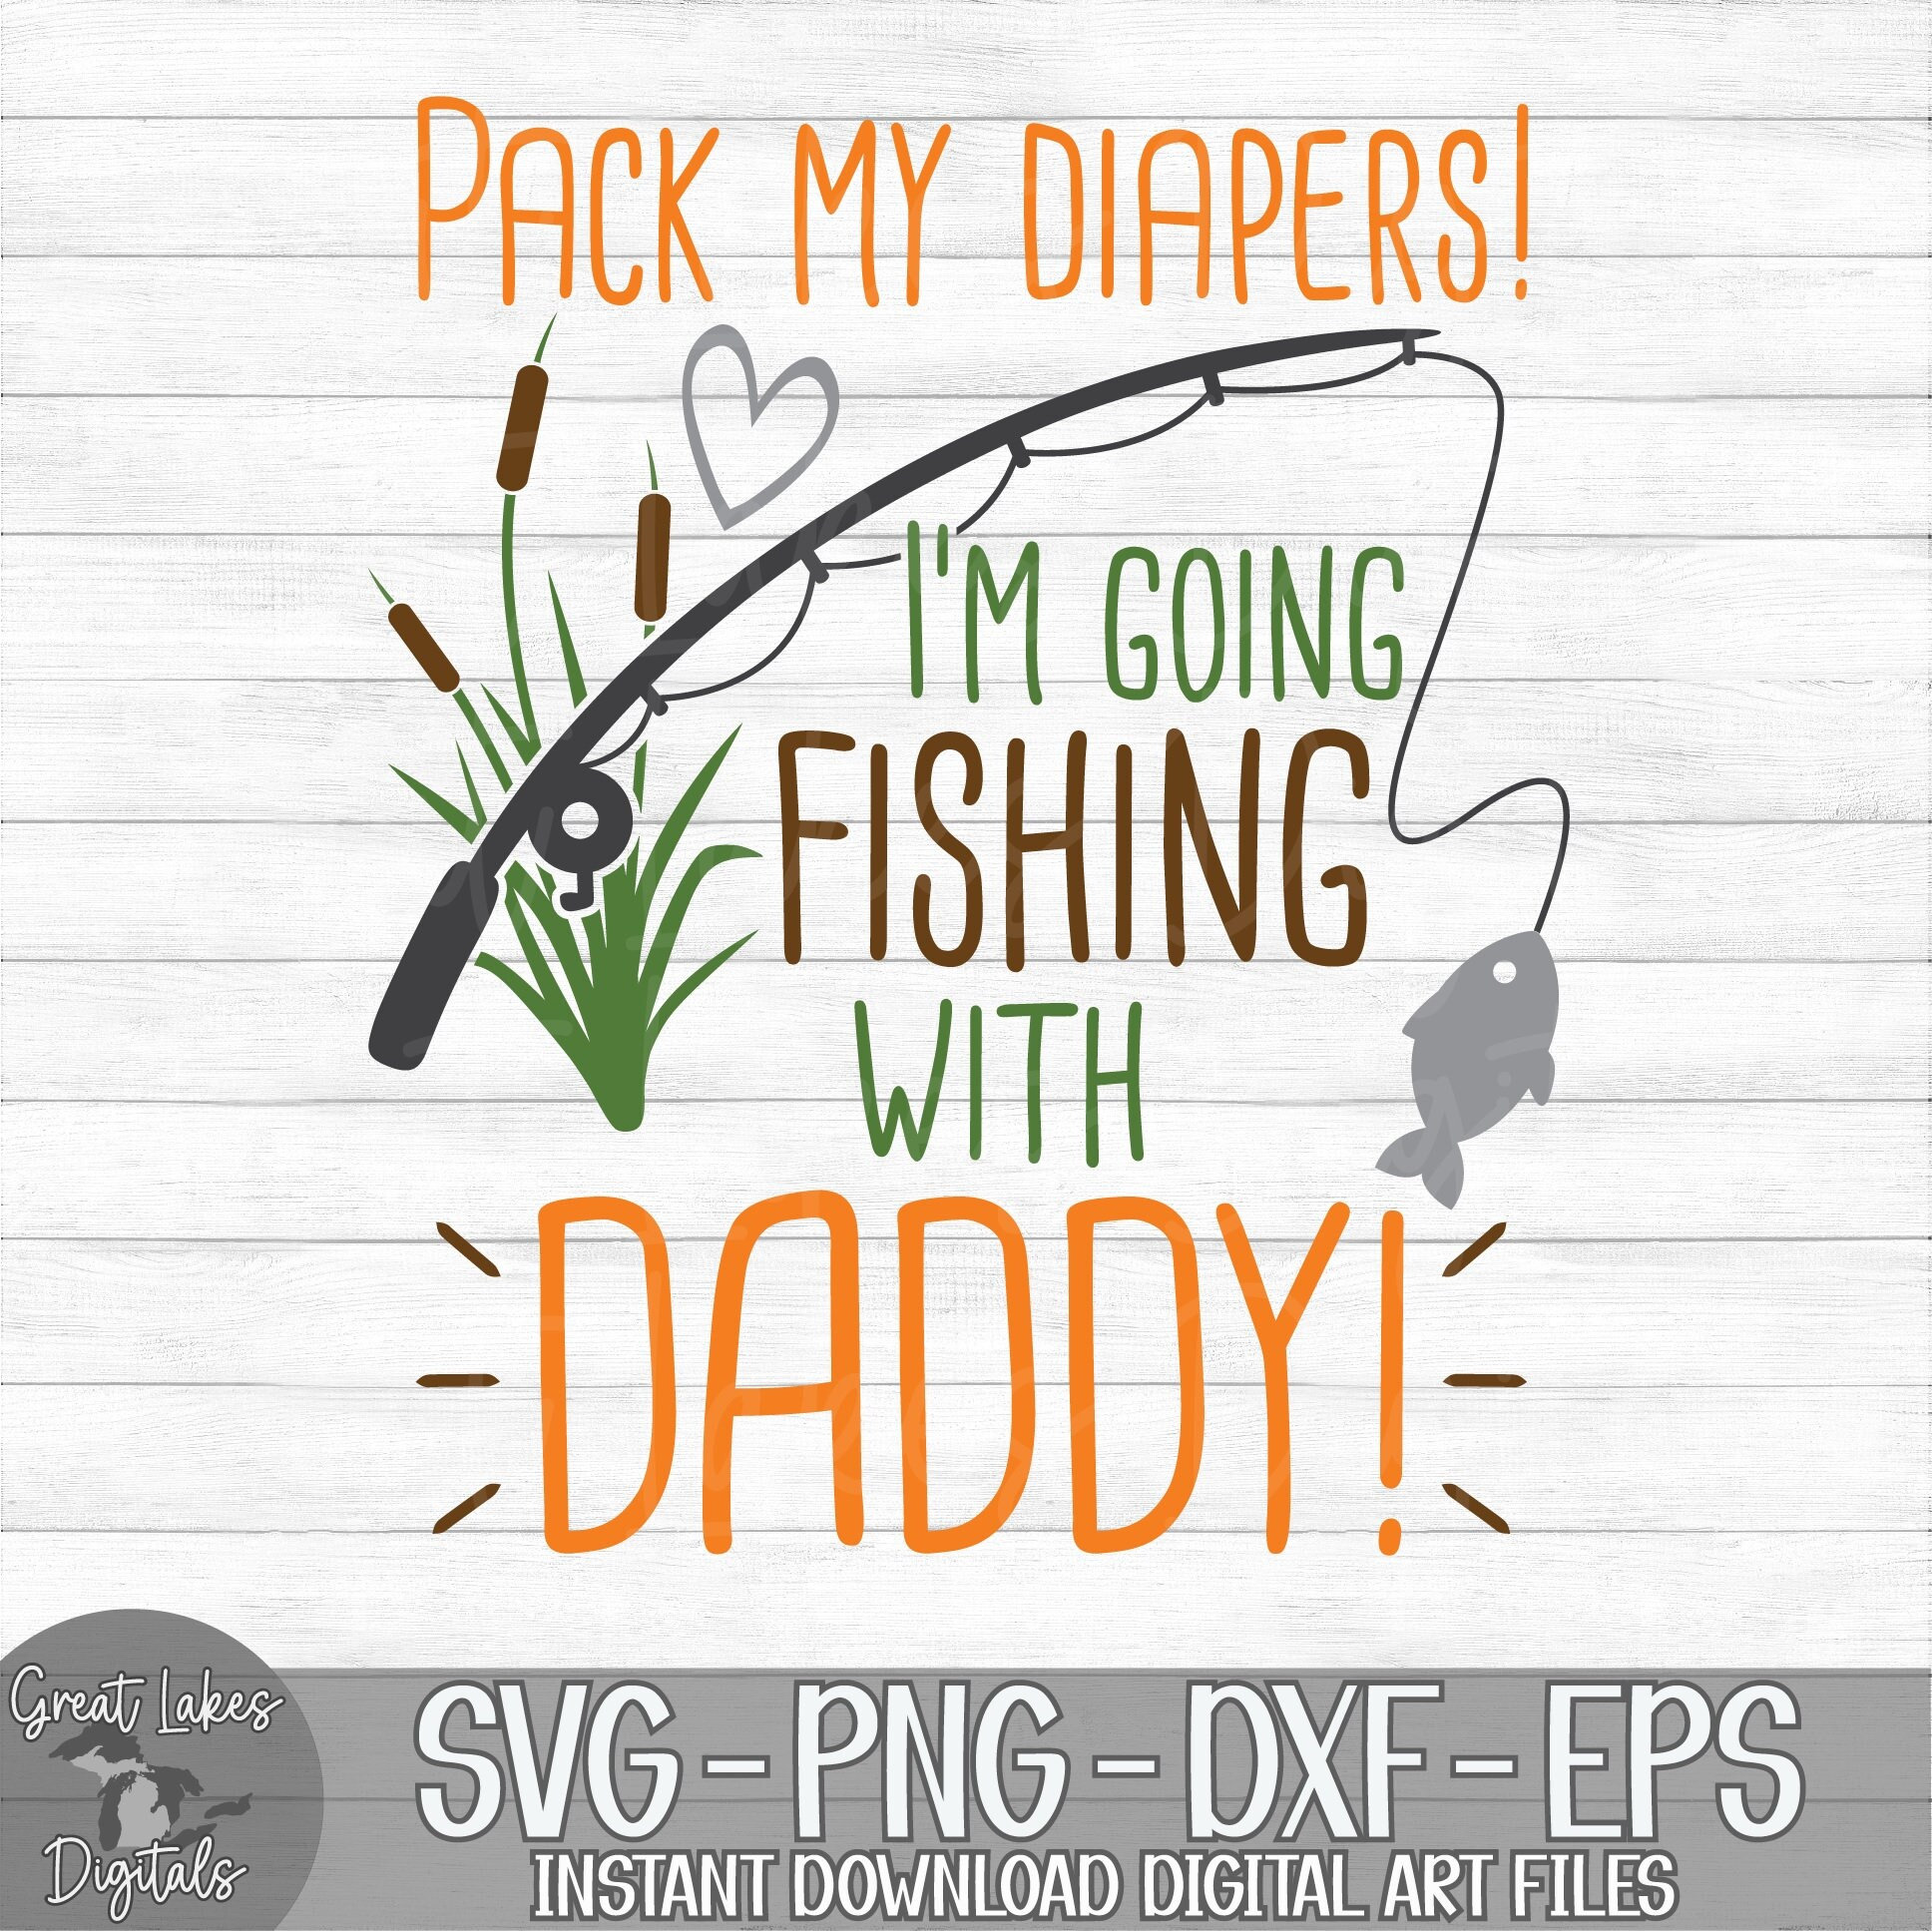 Pack My Diapers I'm Going Fishing With Daddy Instant Digital Download Svg,  Png, Dxf, and Eps Files Included 